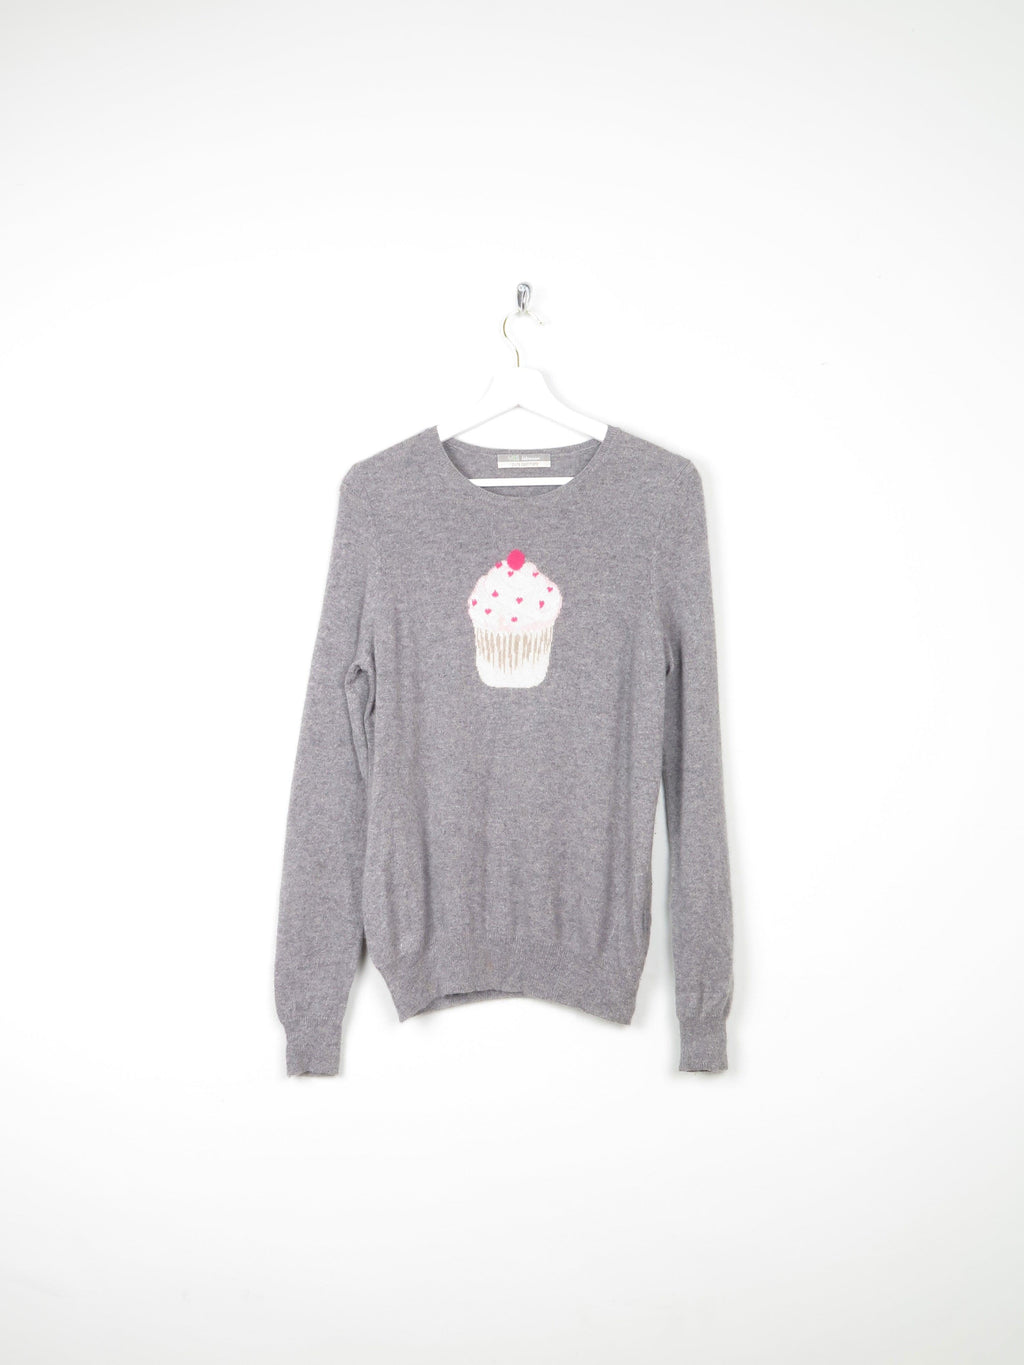 Women's M&S Cashmere Grey Jumper With CupCake Design M - The Harlequin